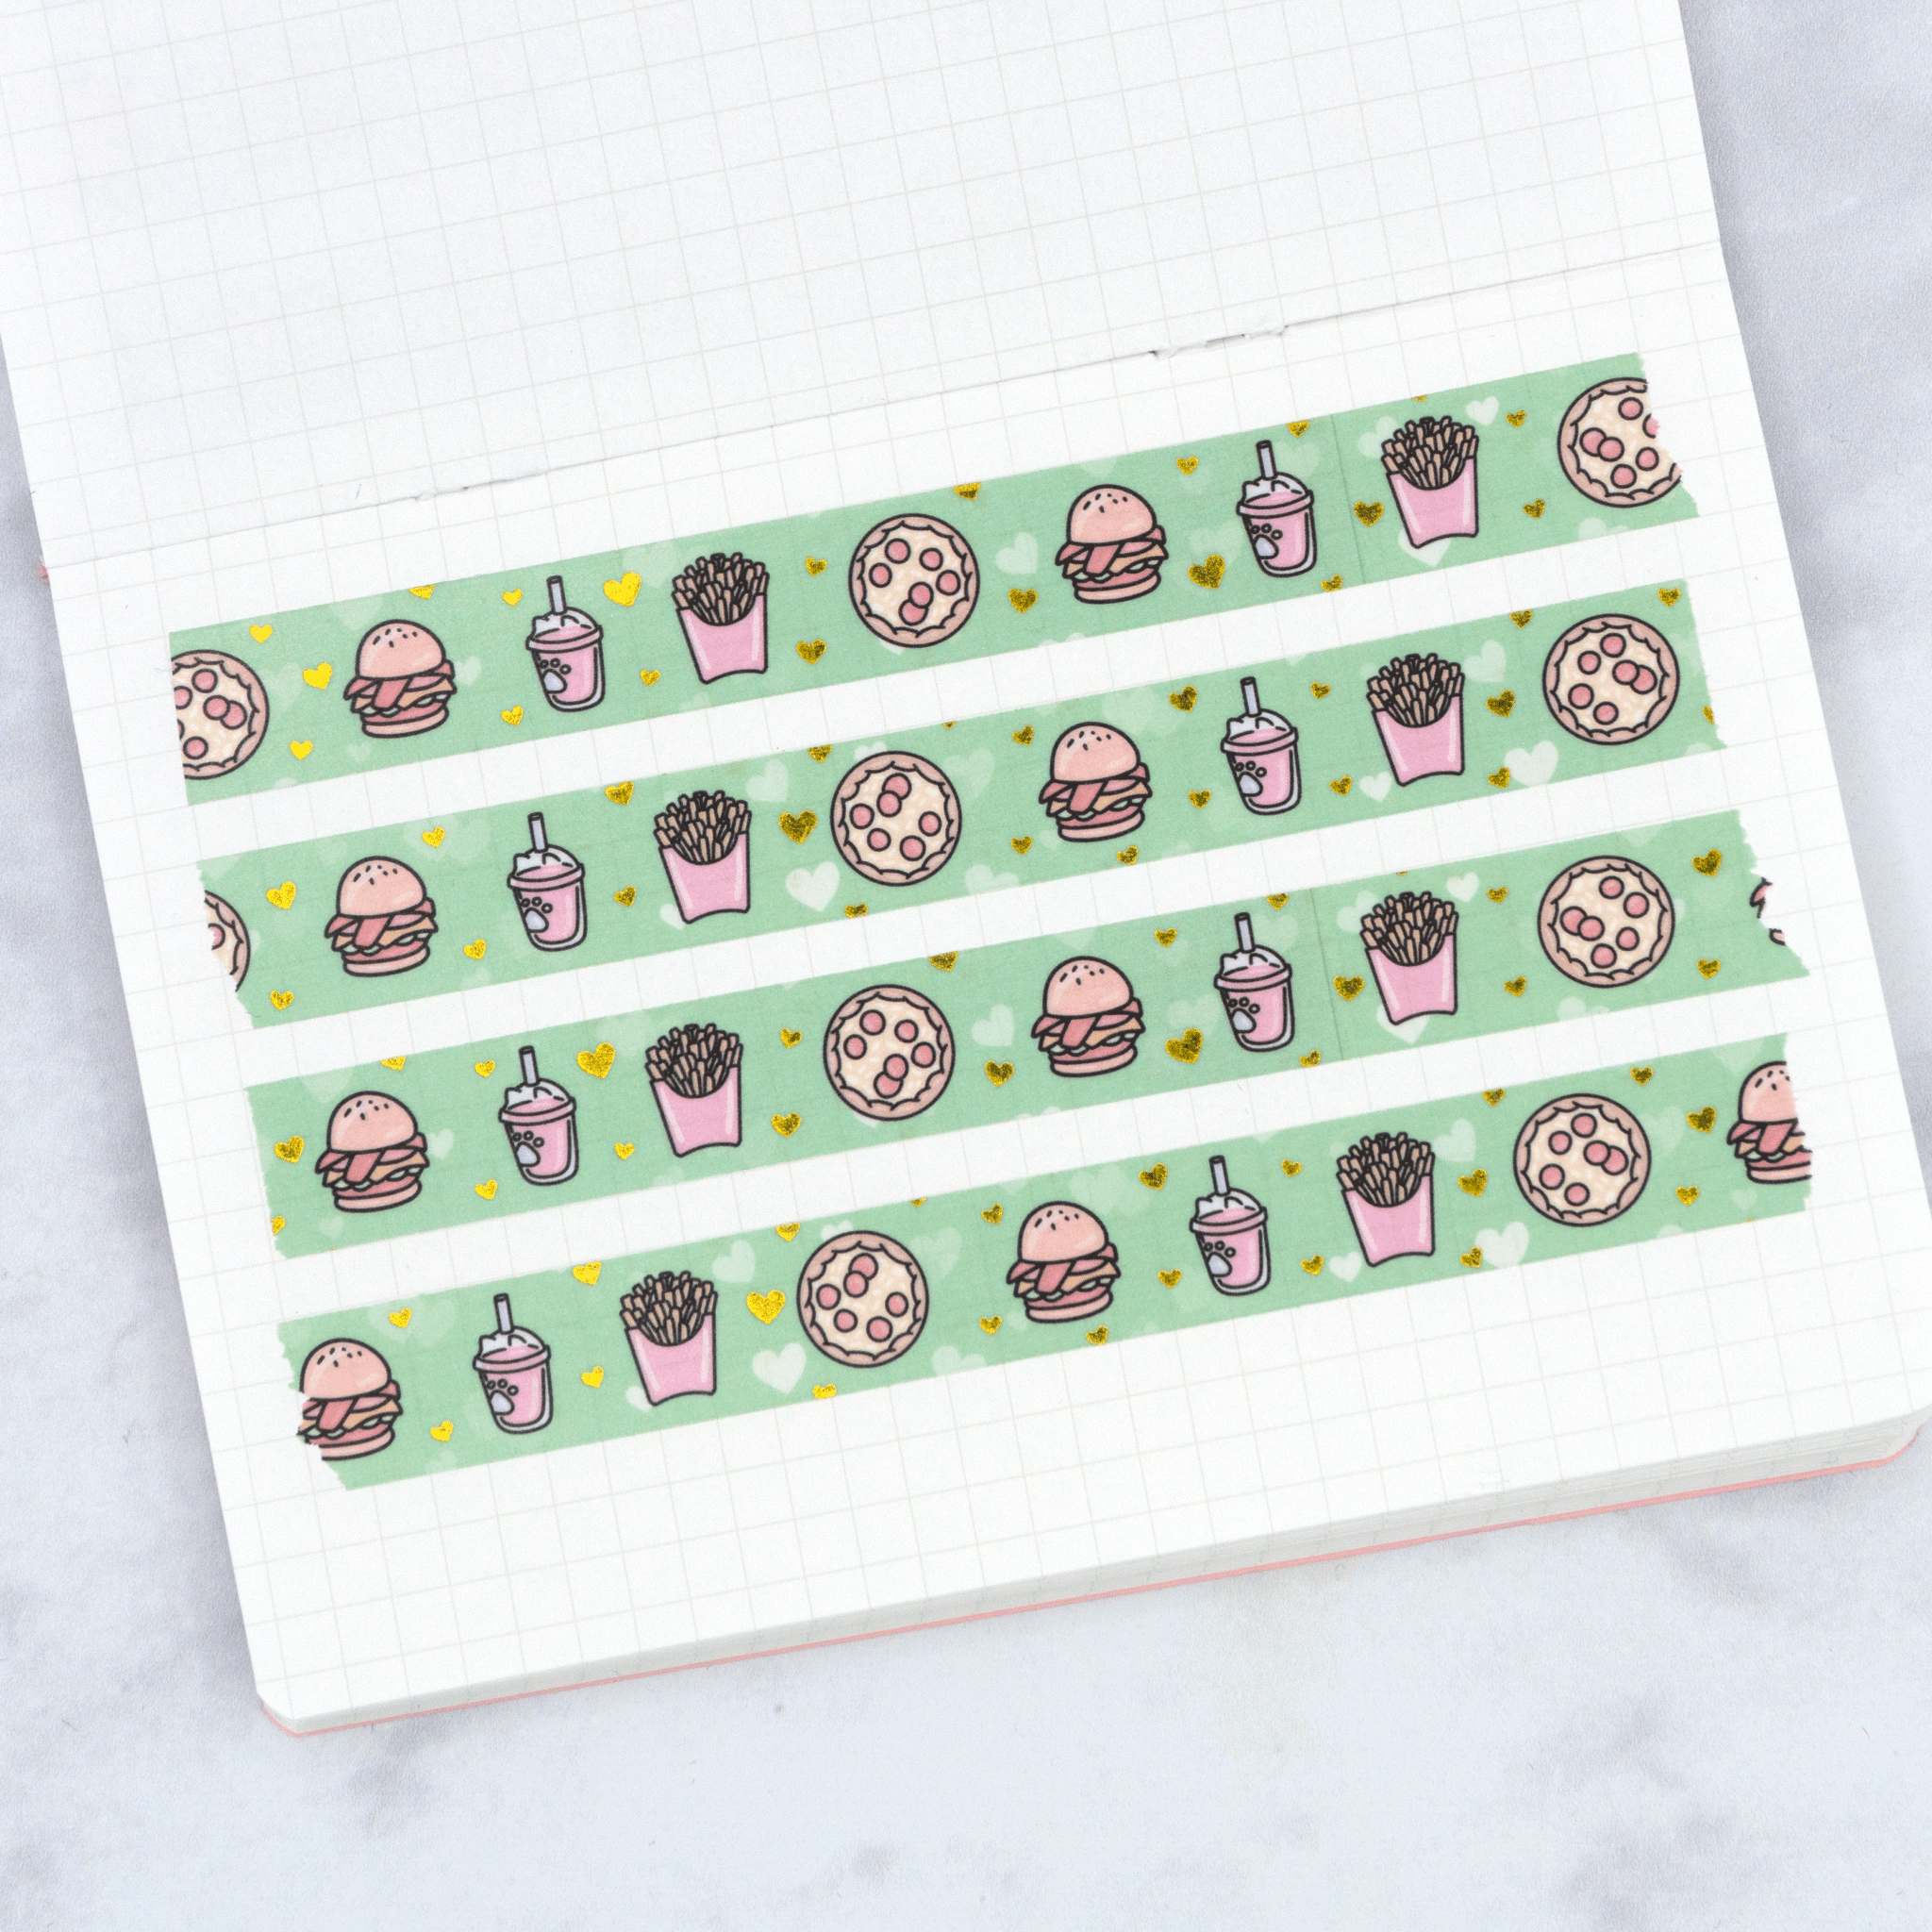 Foiled Doodle Washi Tape Bundle (5 Tapes) by Plannerface